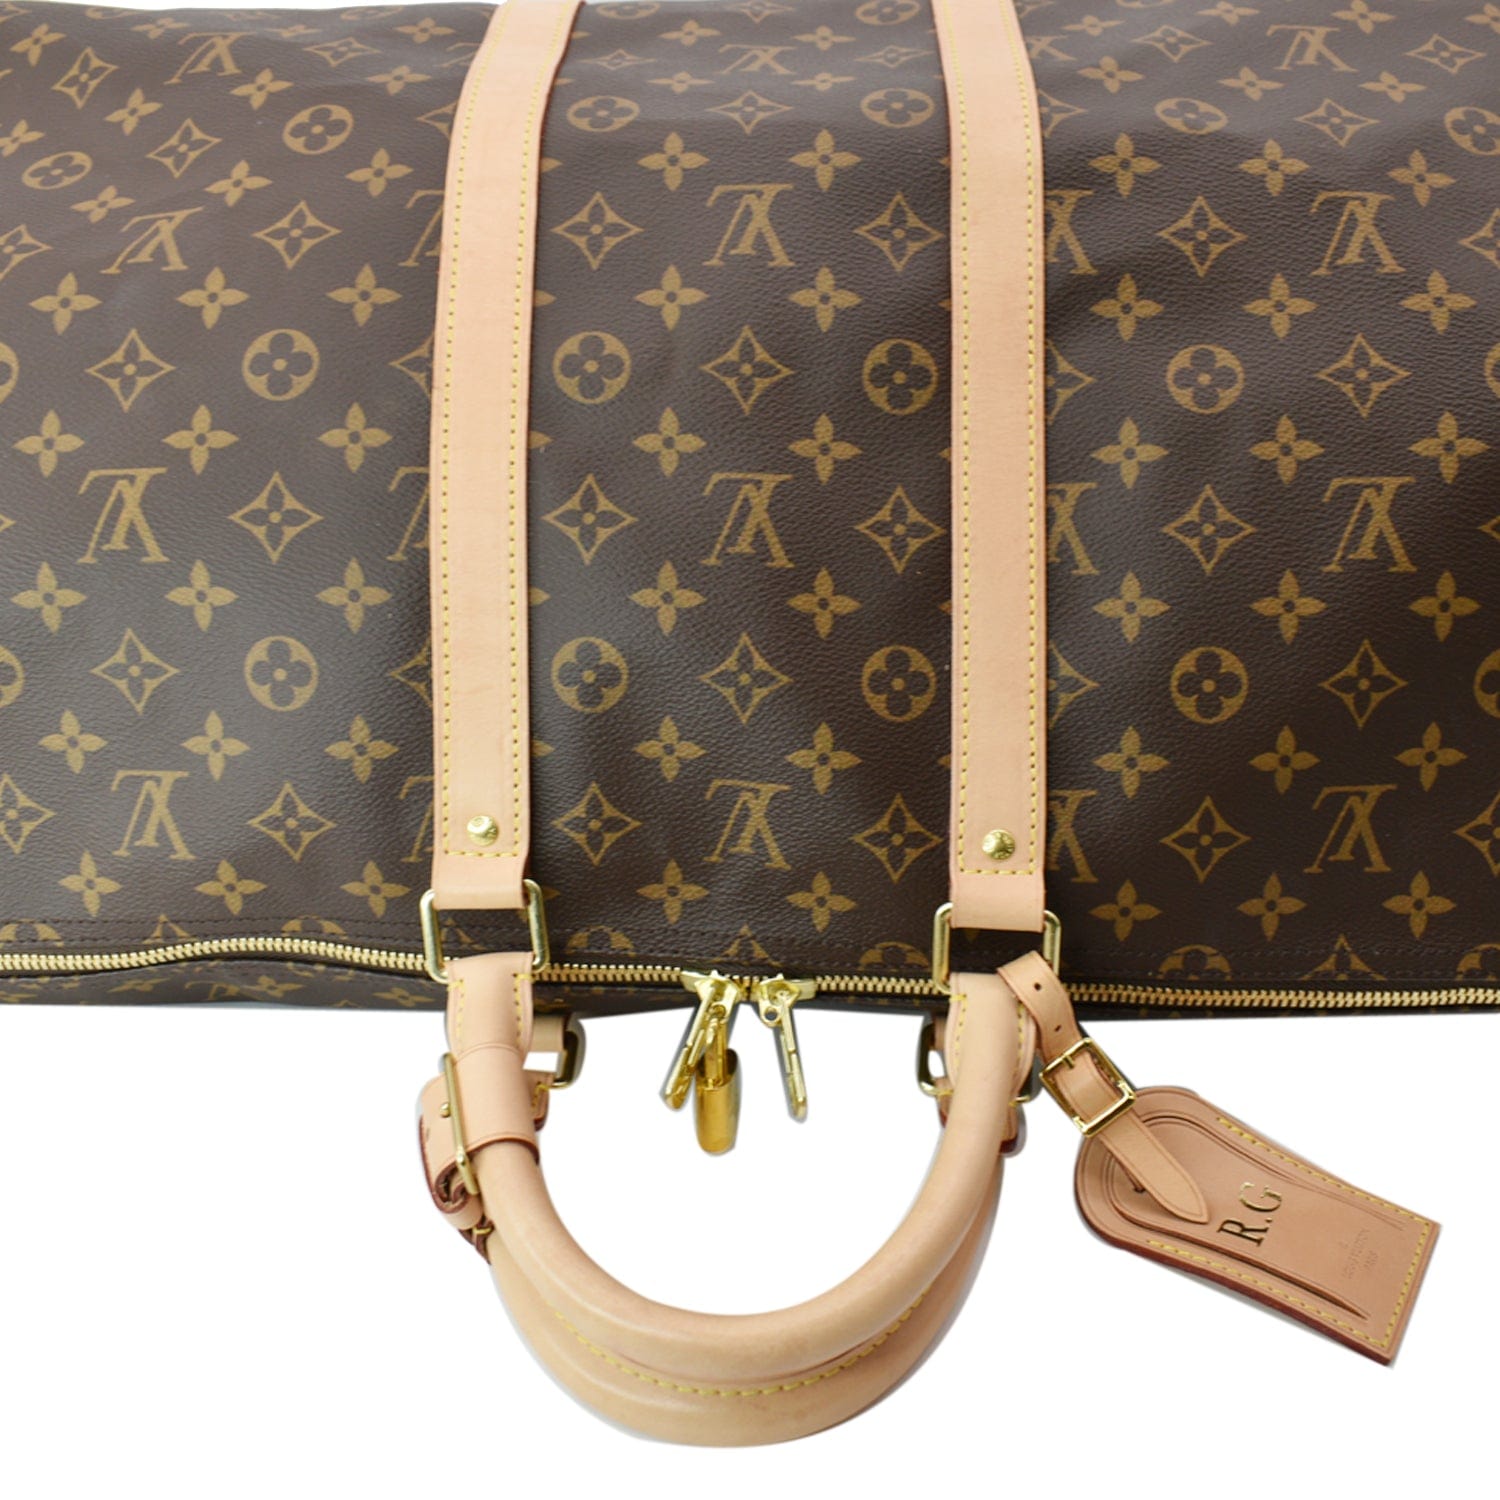 Travel bag Louis Vuitton Keepall 55 customized Fight Club by the artist  PatBo!